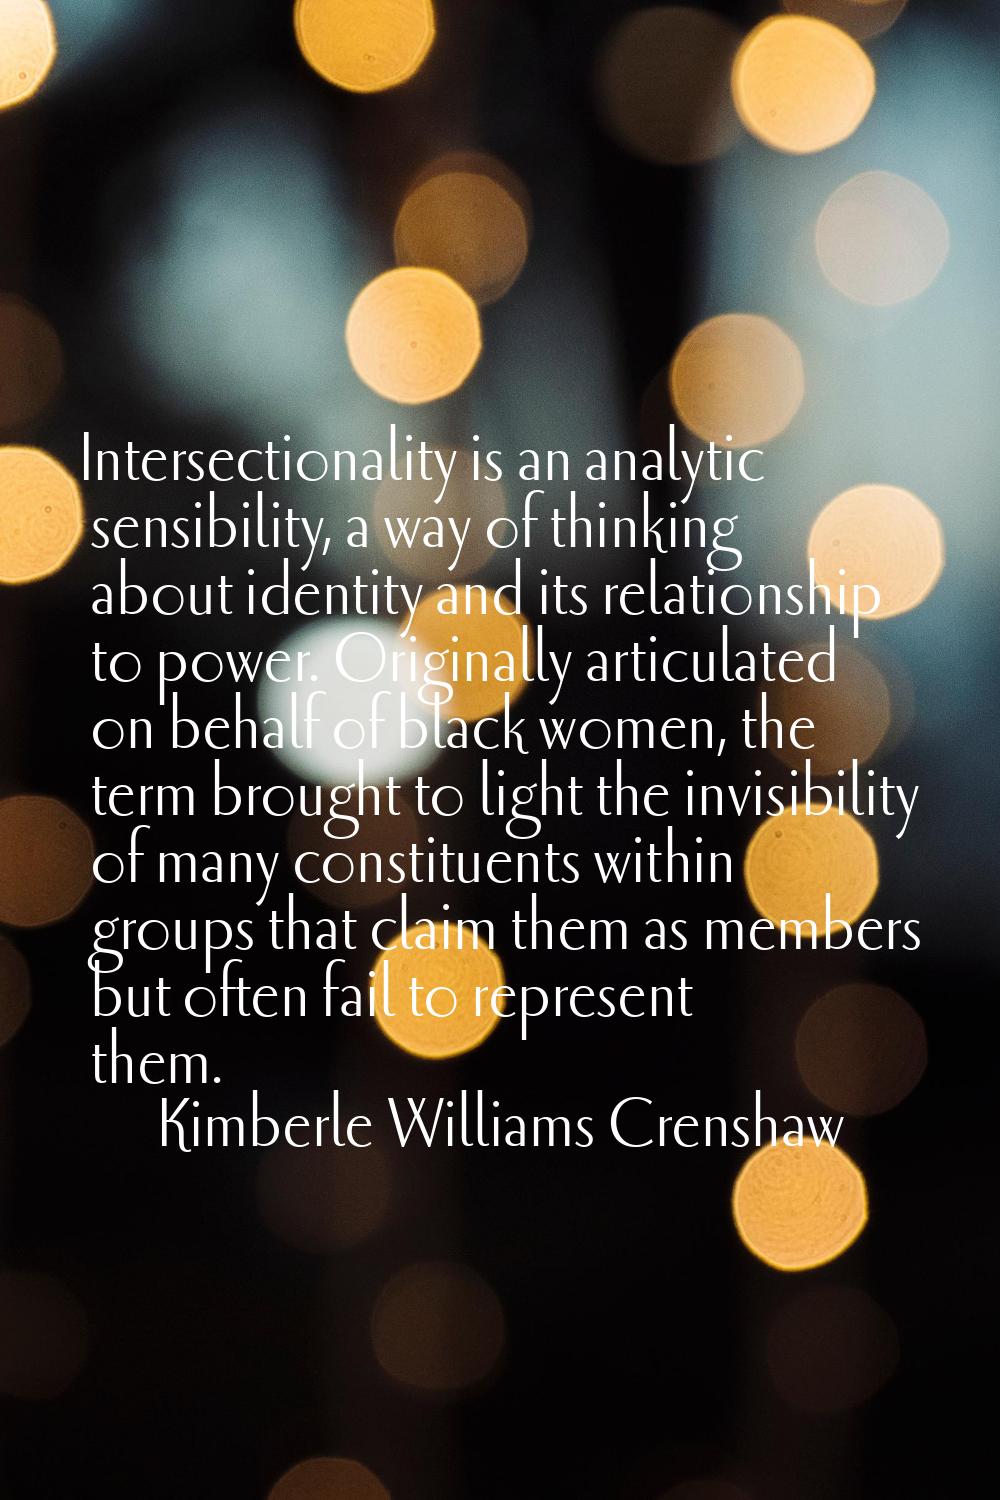 Intersectionality is an analytic sensibility, a way of thinking about identity and its relationship